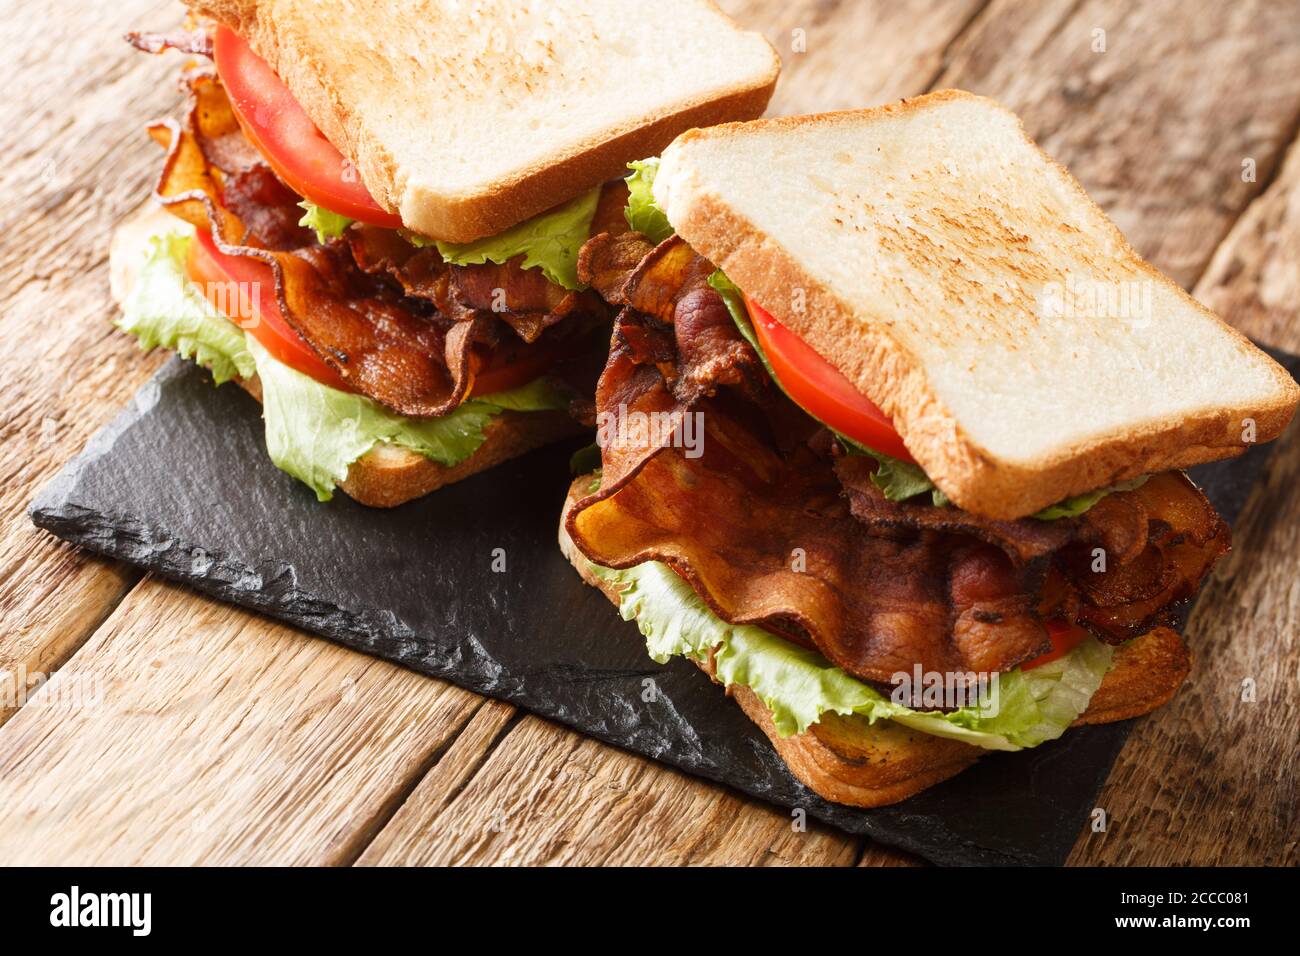 Delicious blt sandwich with bacon, iceberg salad and tomatoes close-up on a slate board on the table. horizontal Stock Photo